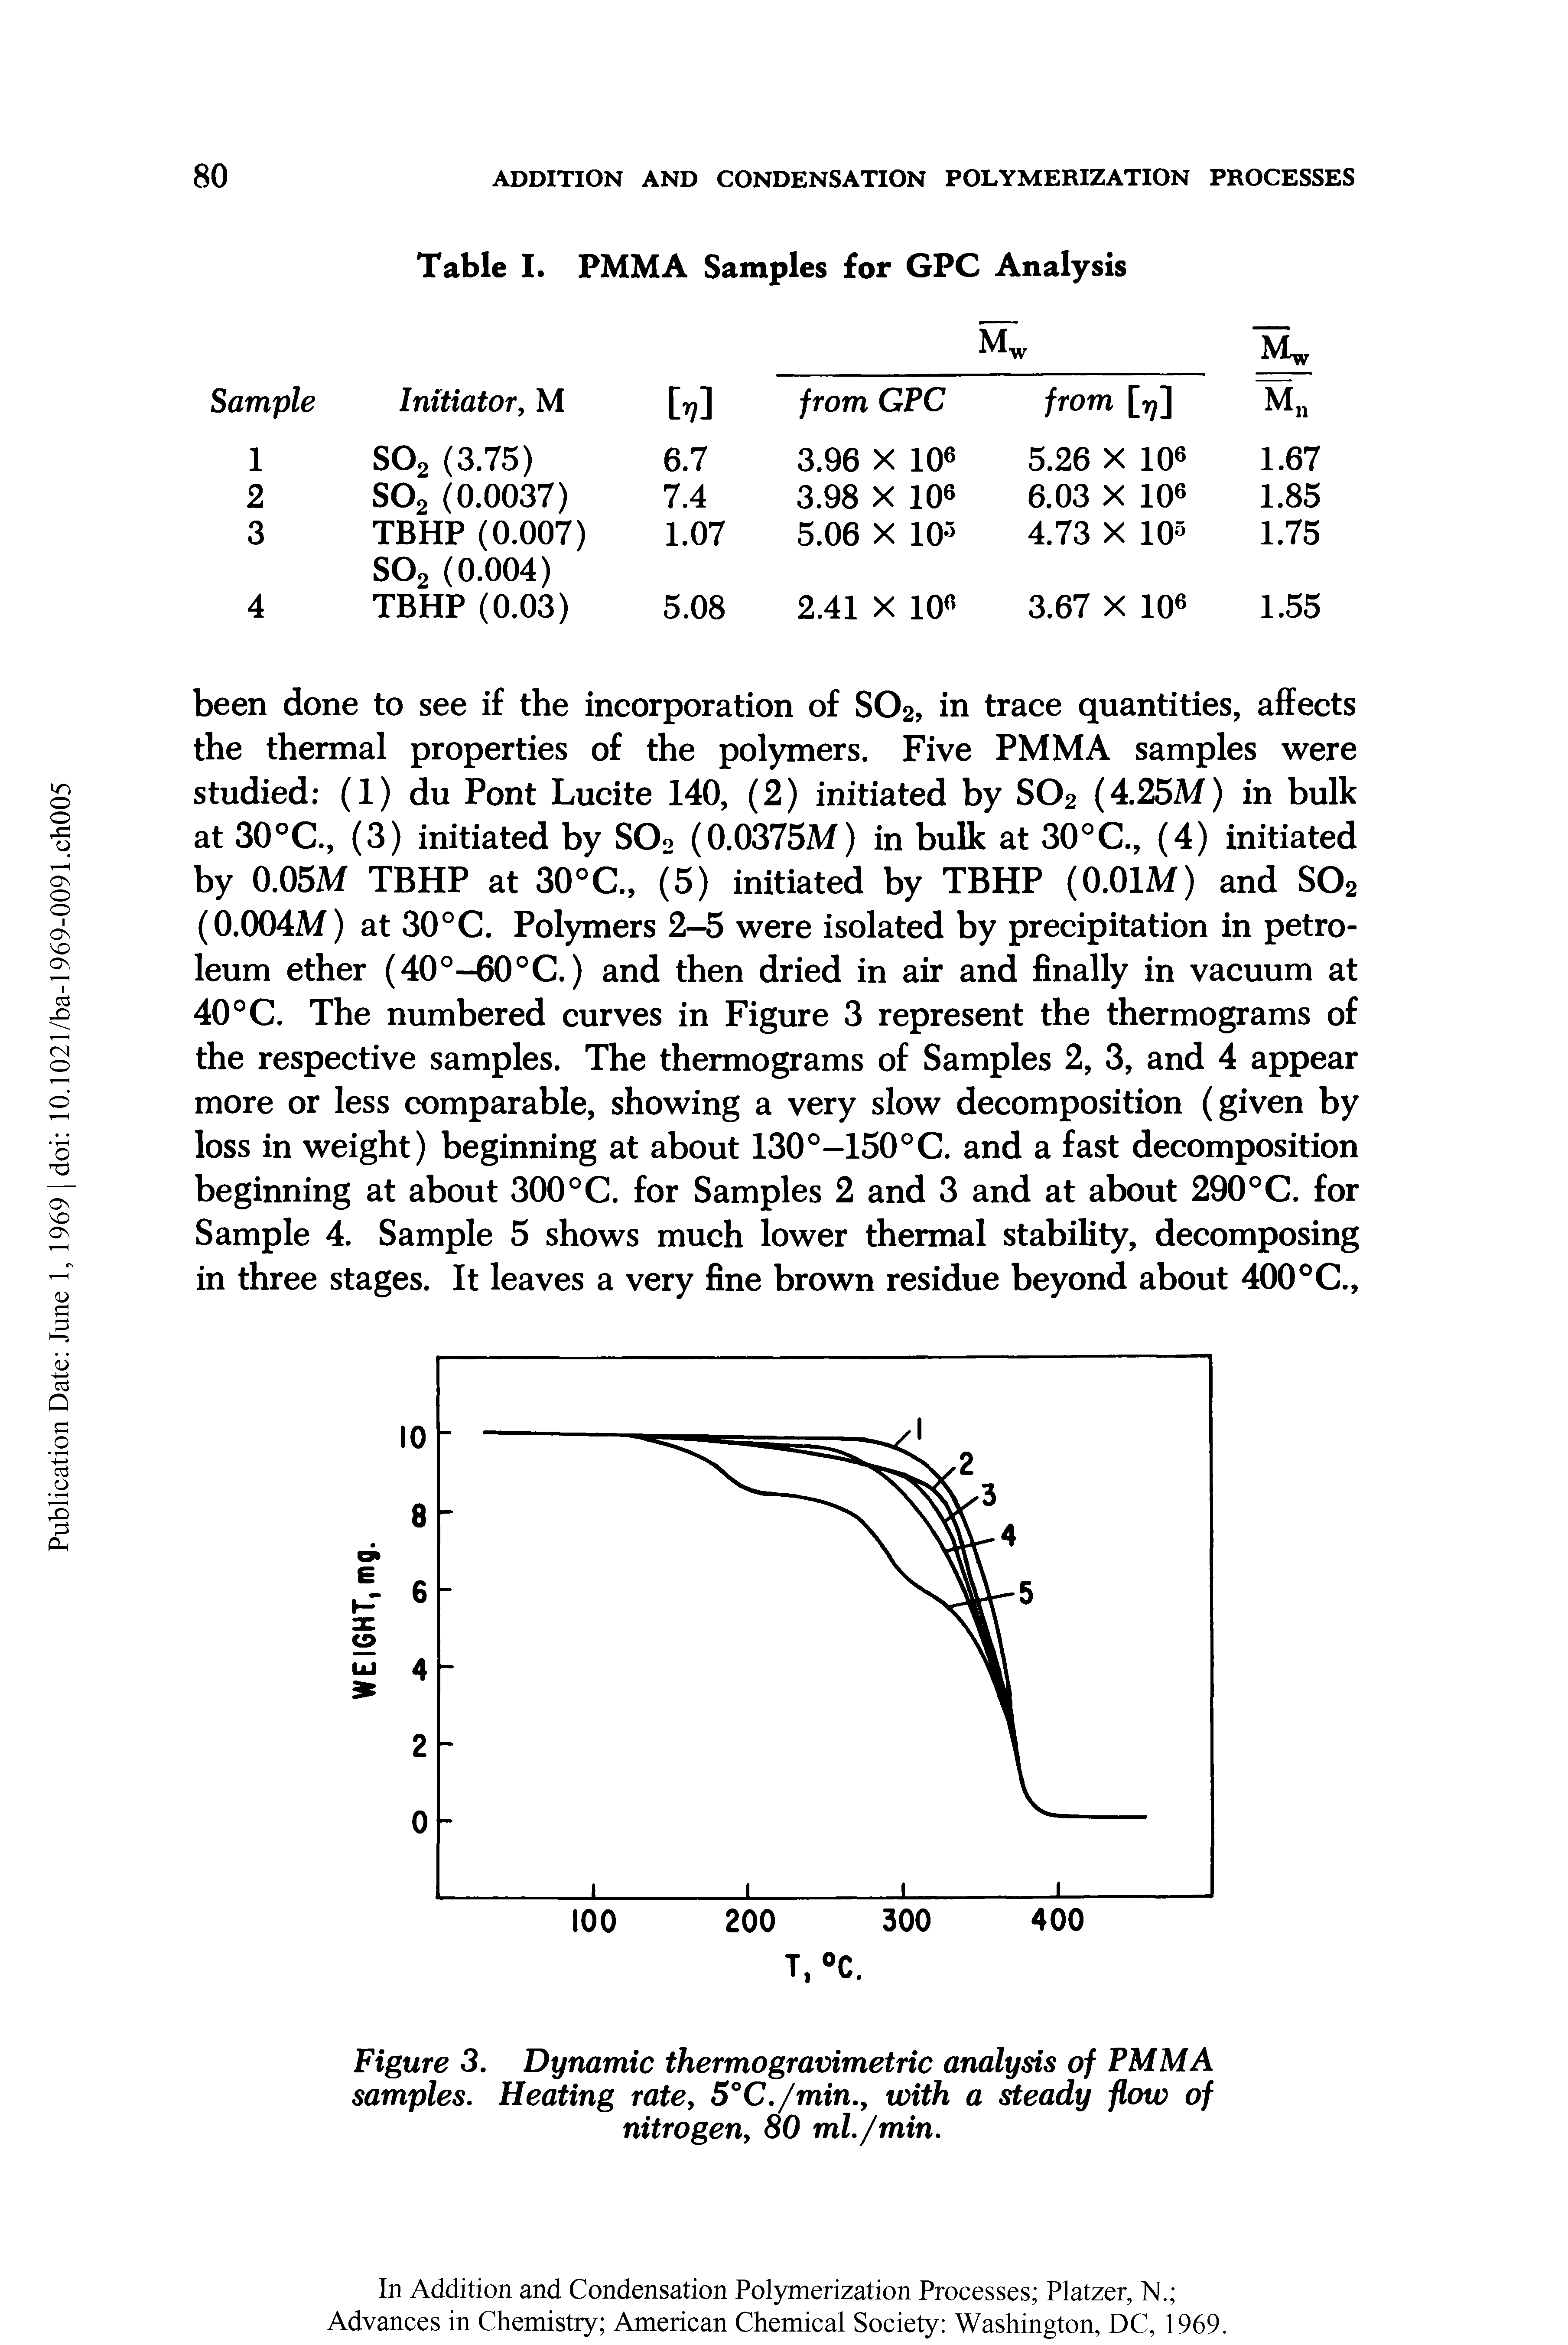 Figure 3. Dynamic thermo gravimetric analysis of PMMA samples. Heating rate, 5°C./mm., with a steady flow of nitrogen, 80 ml./min.